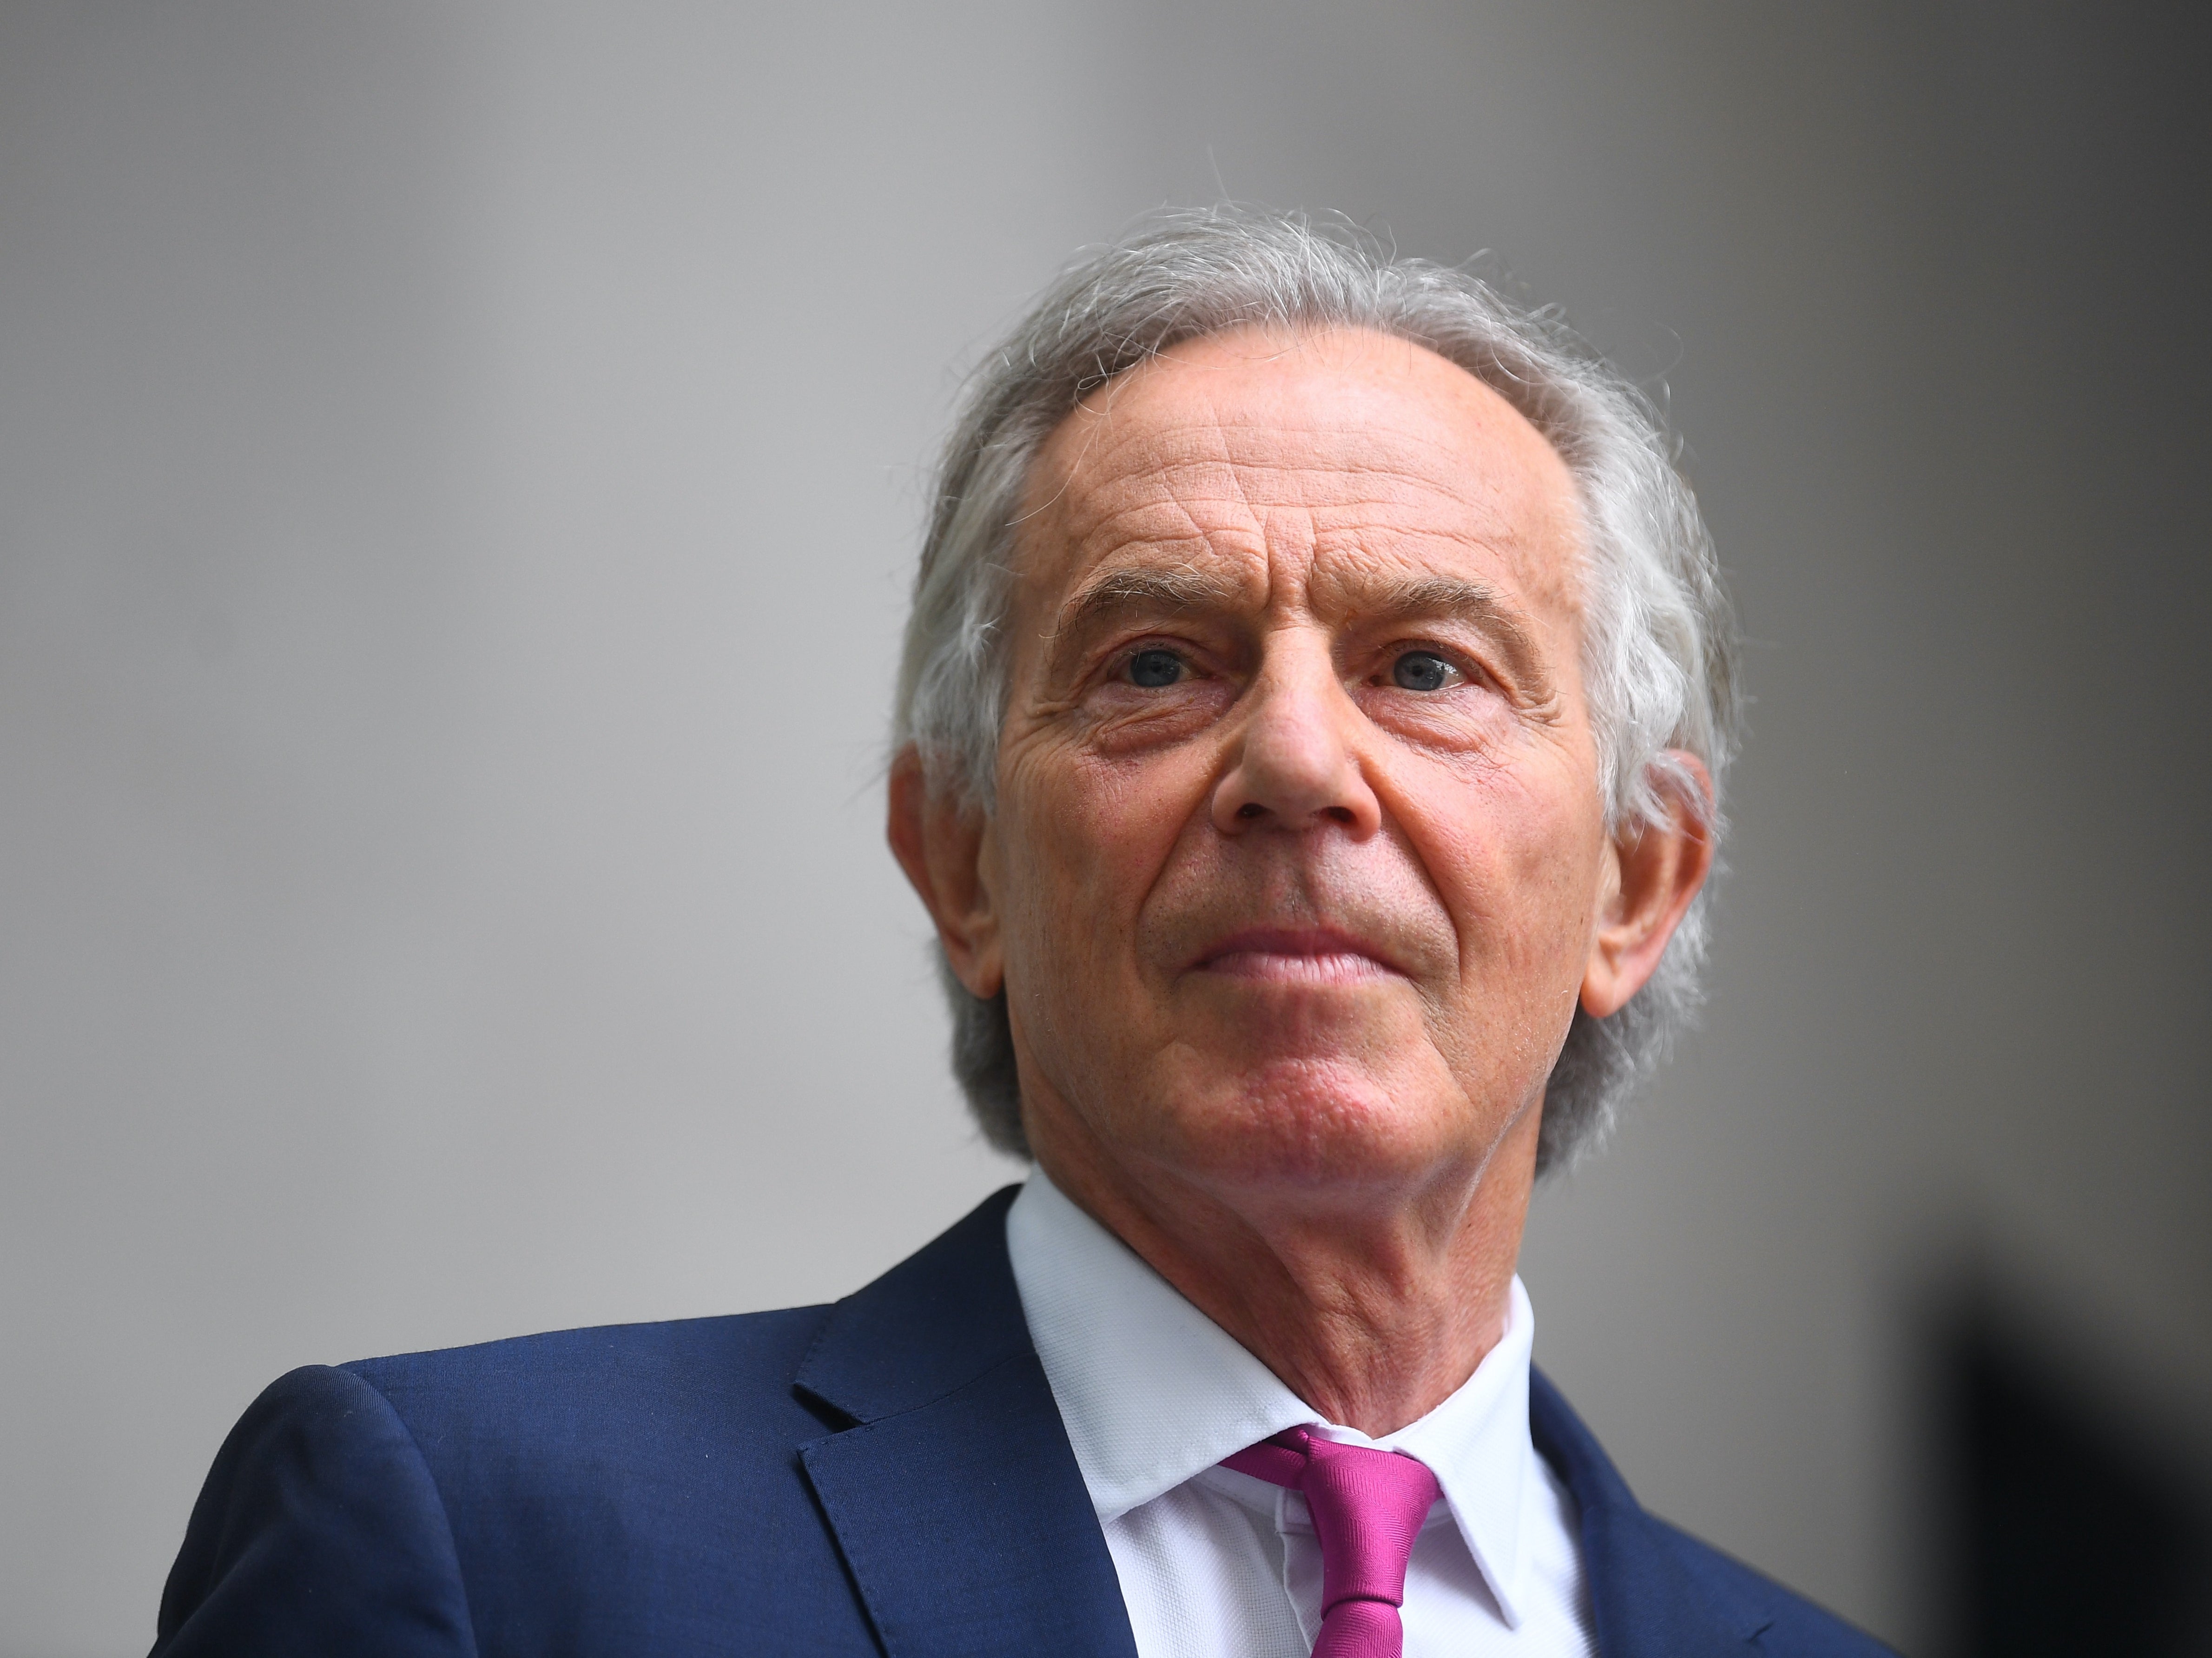 Blair was an exceptional leader, but he didn’t get to be prime minister for a decade just by having a big smile and an effective speaking style